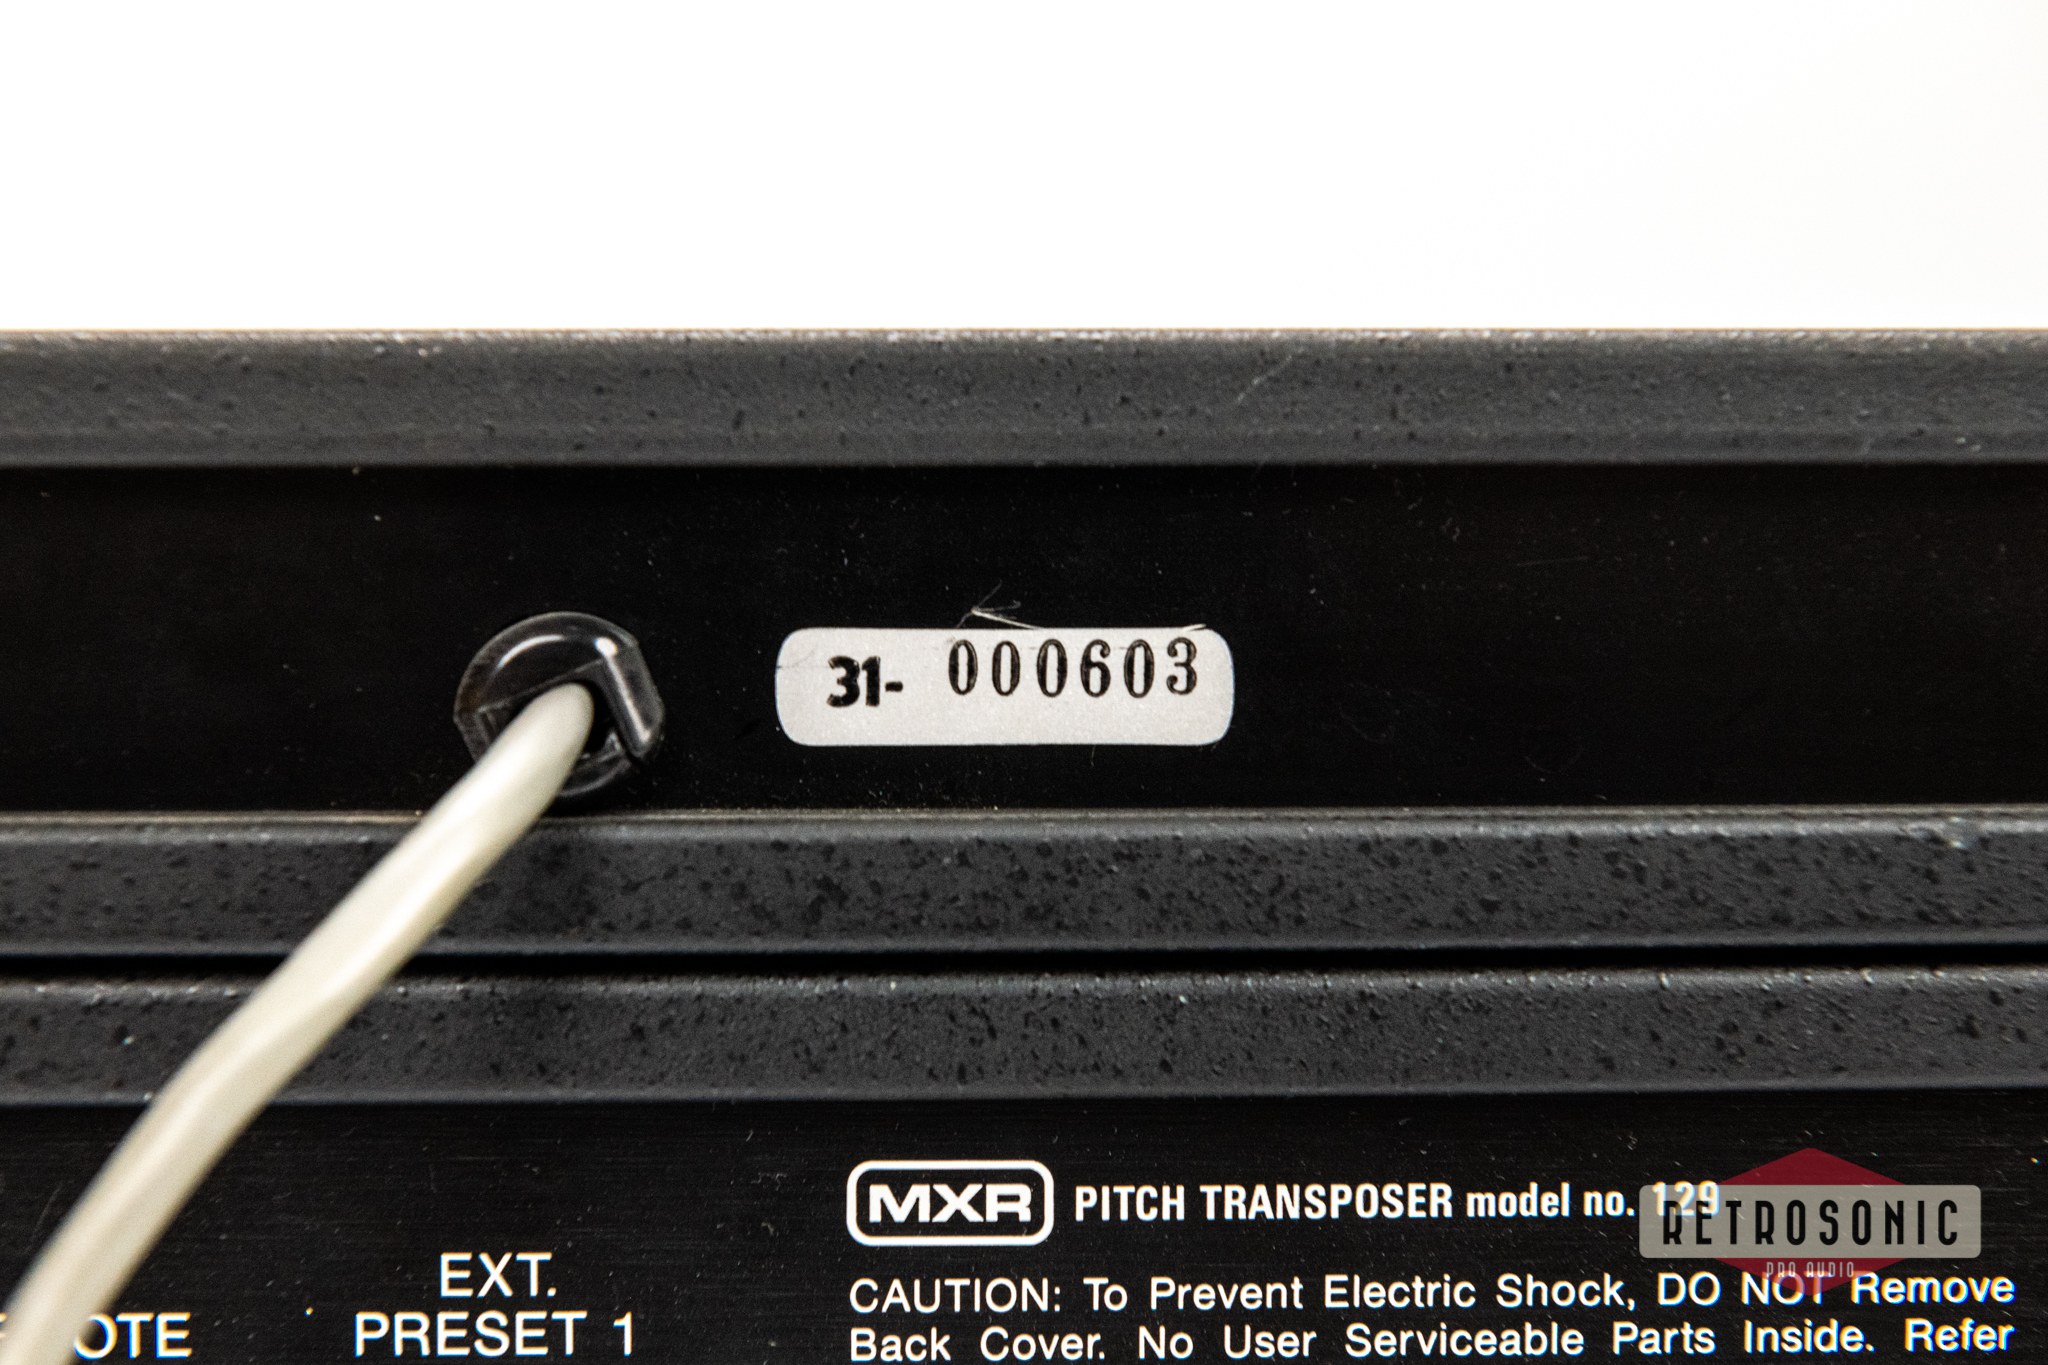 MXR Pitch Transposer M-129 with Display